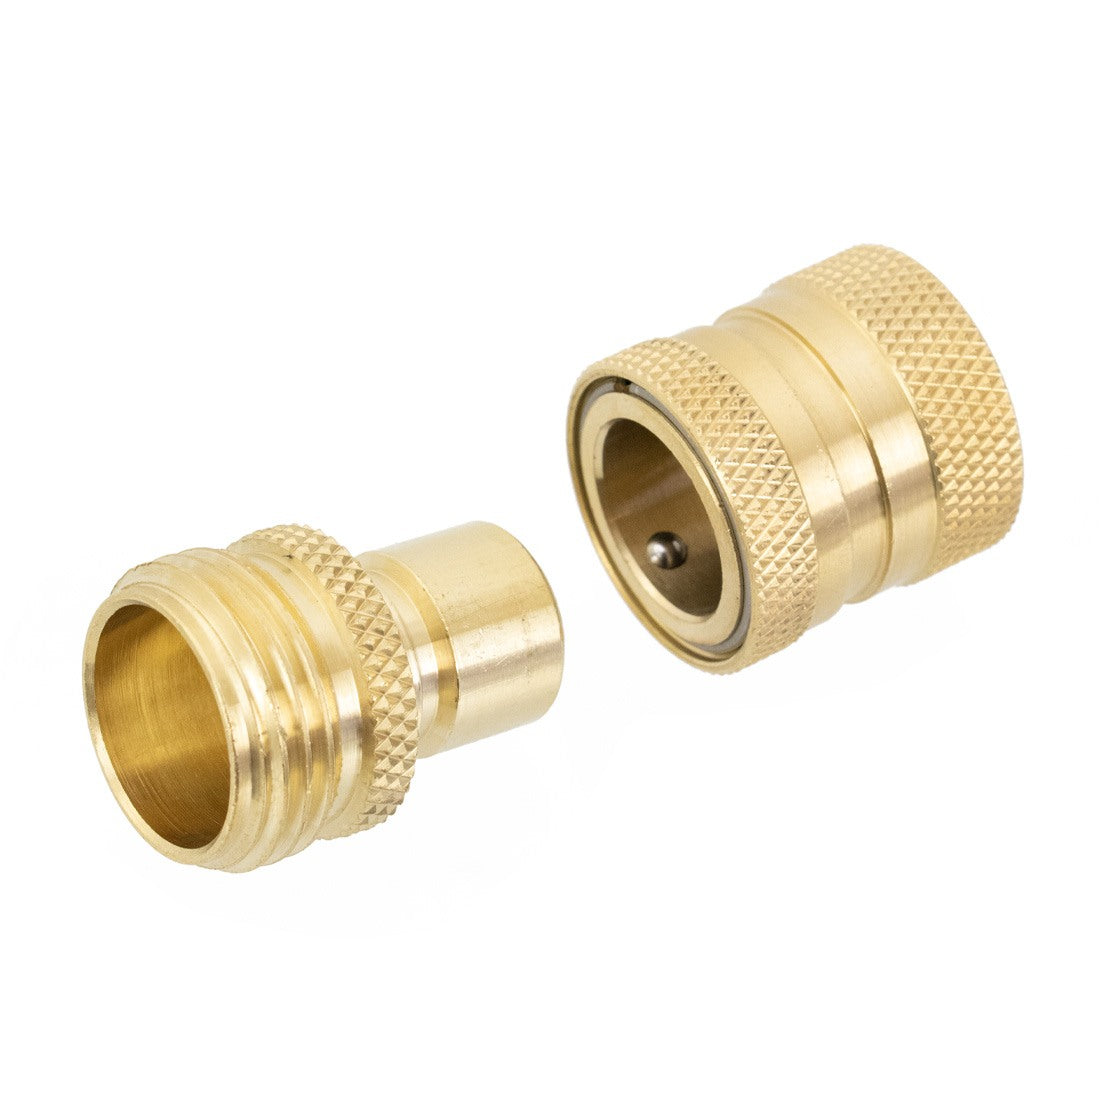 Garden Hose Quick Connect Male and Female Set - Brass